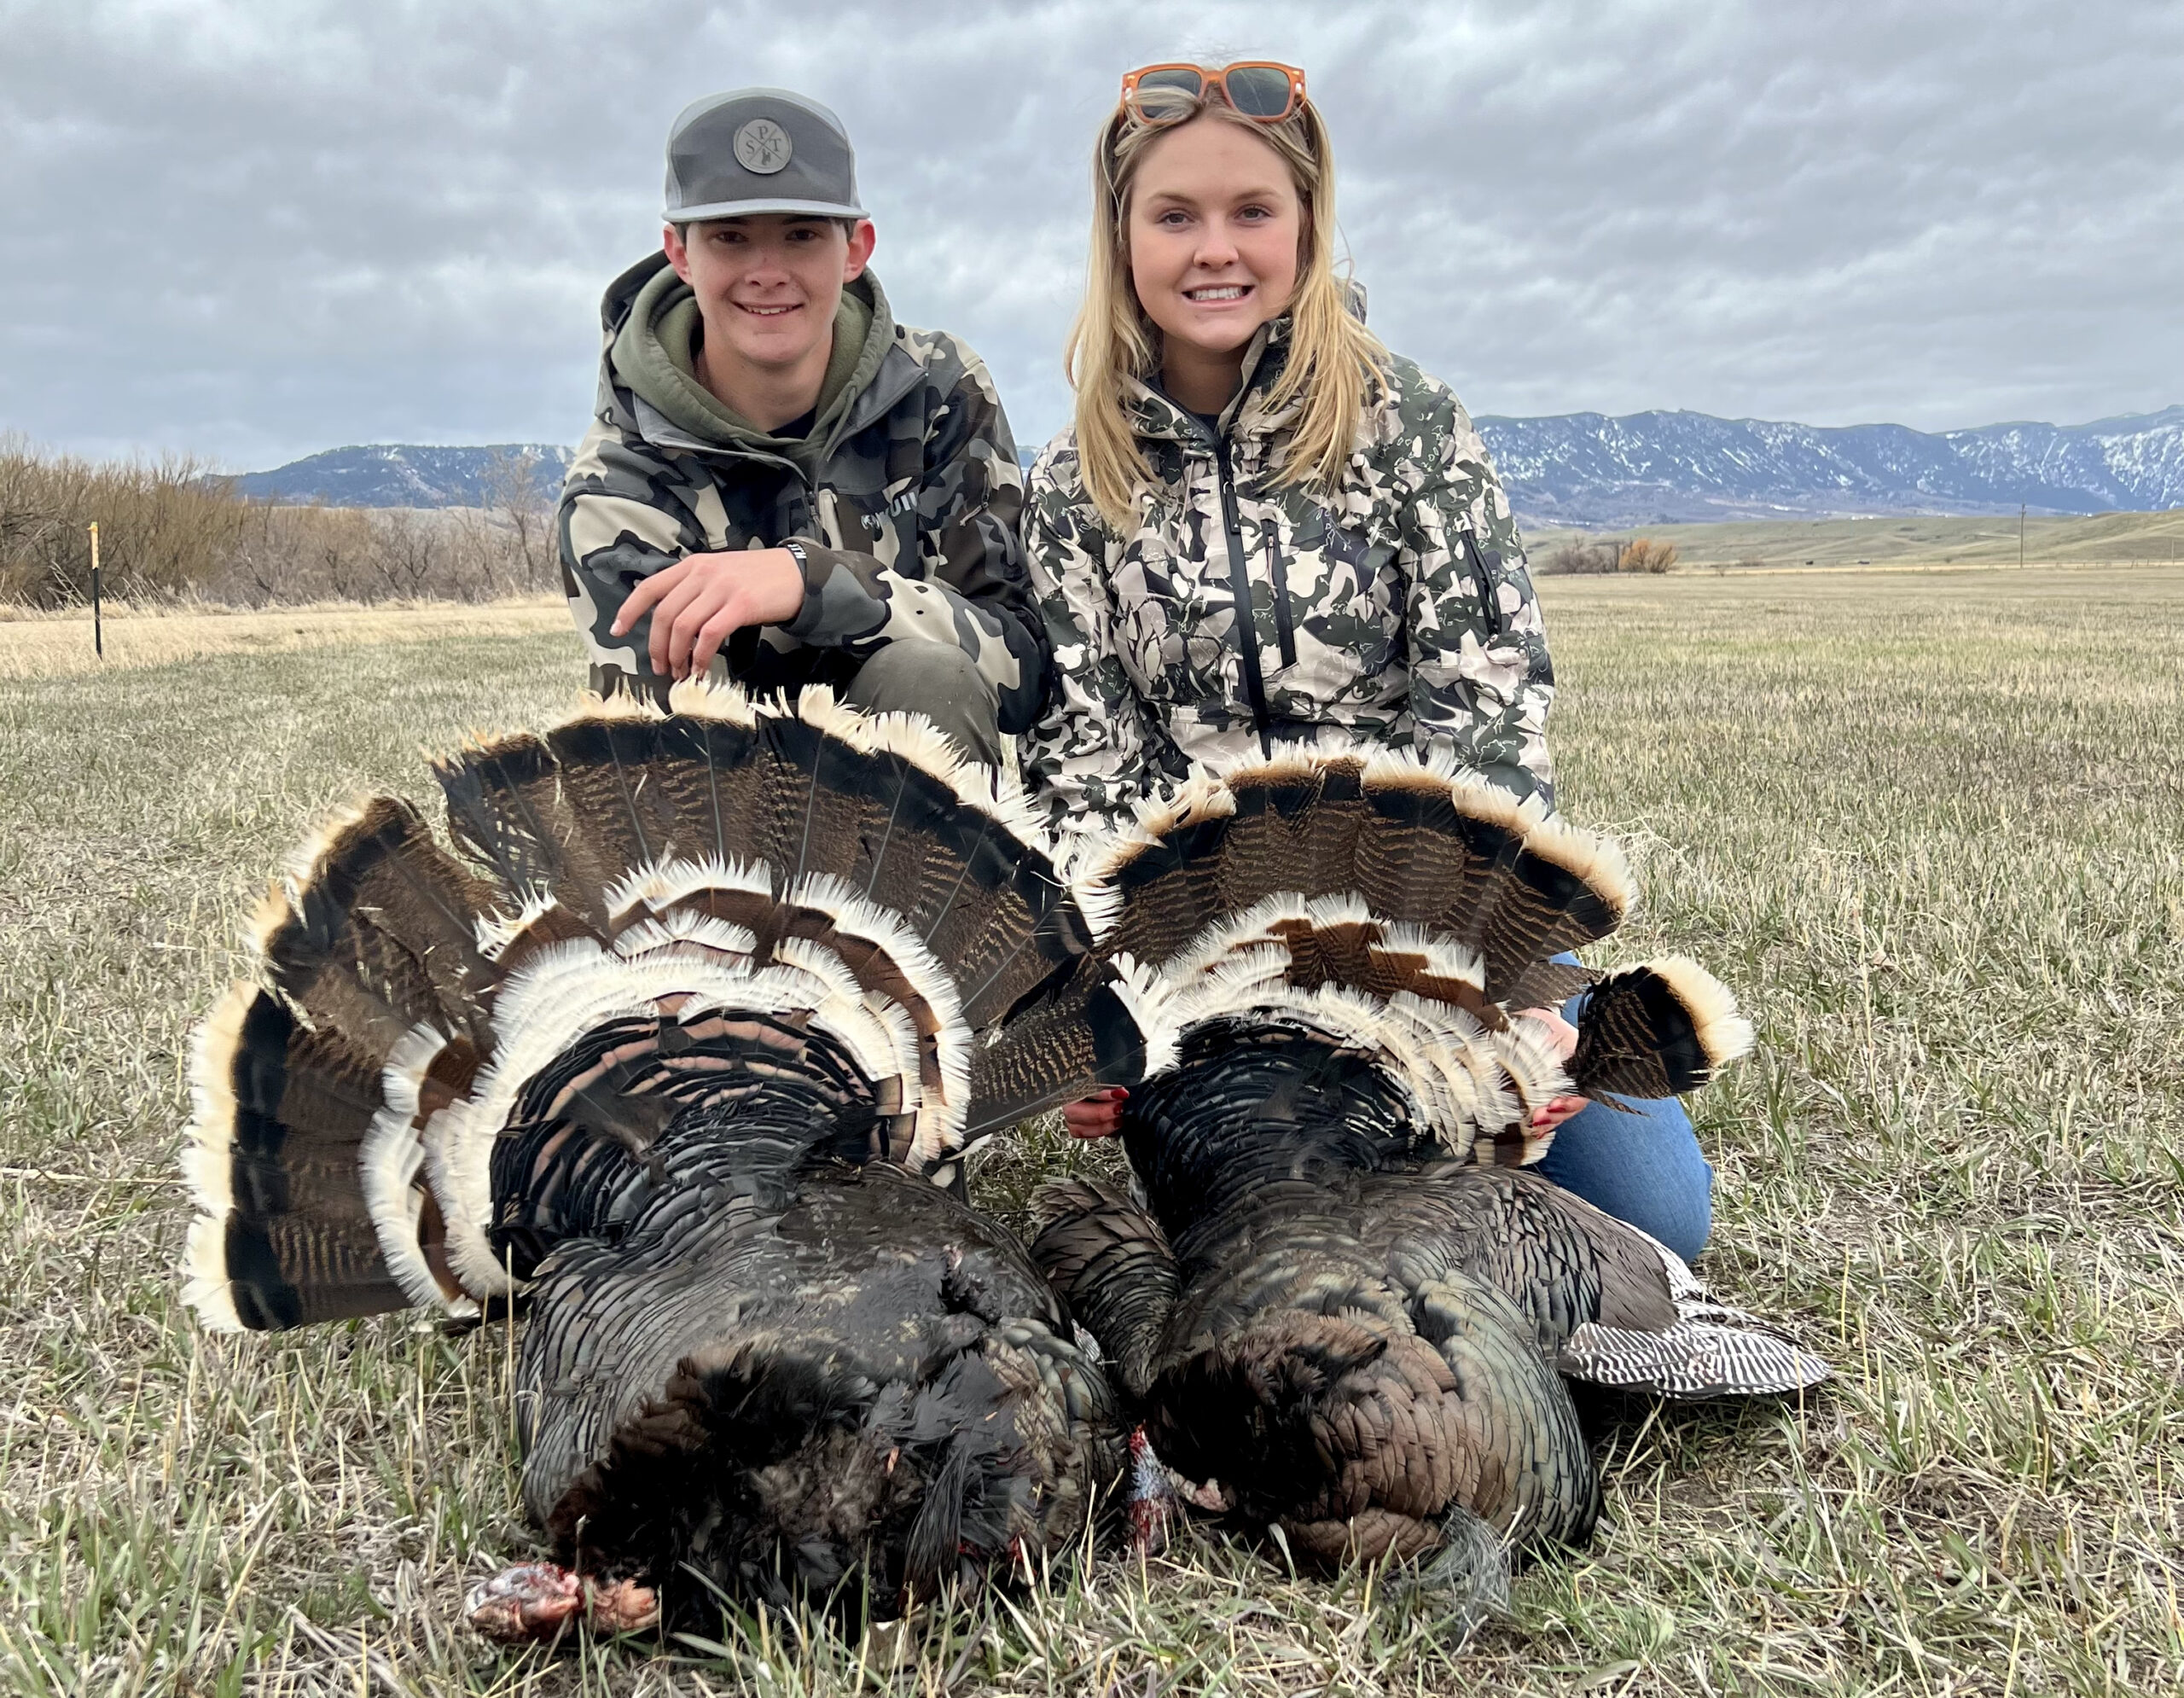 Two Wyoming teens with their turkeys before prom night.